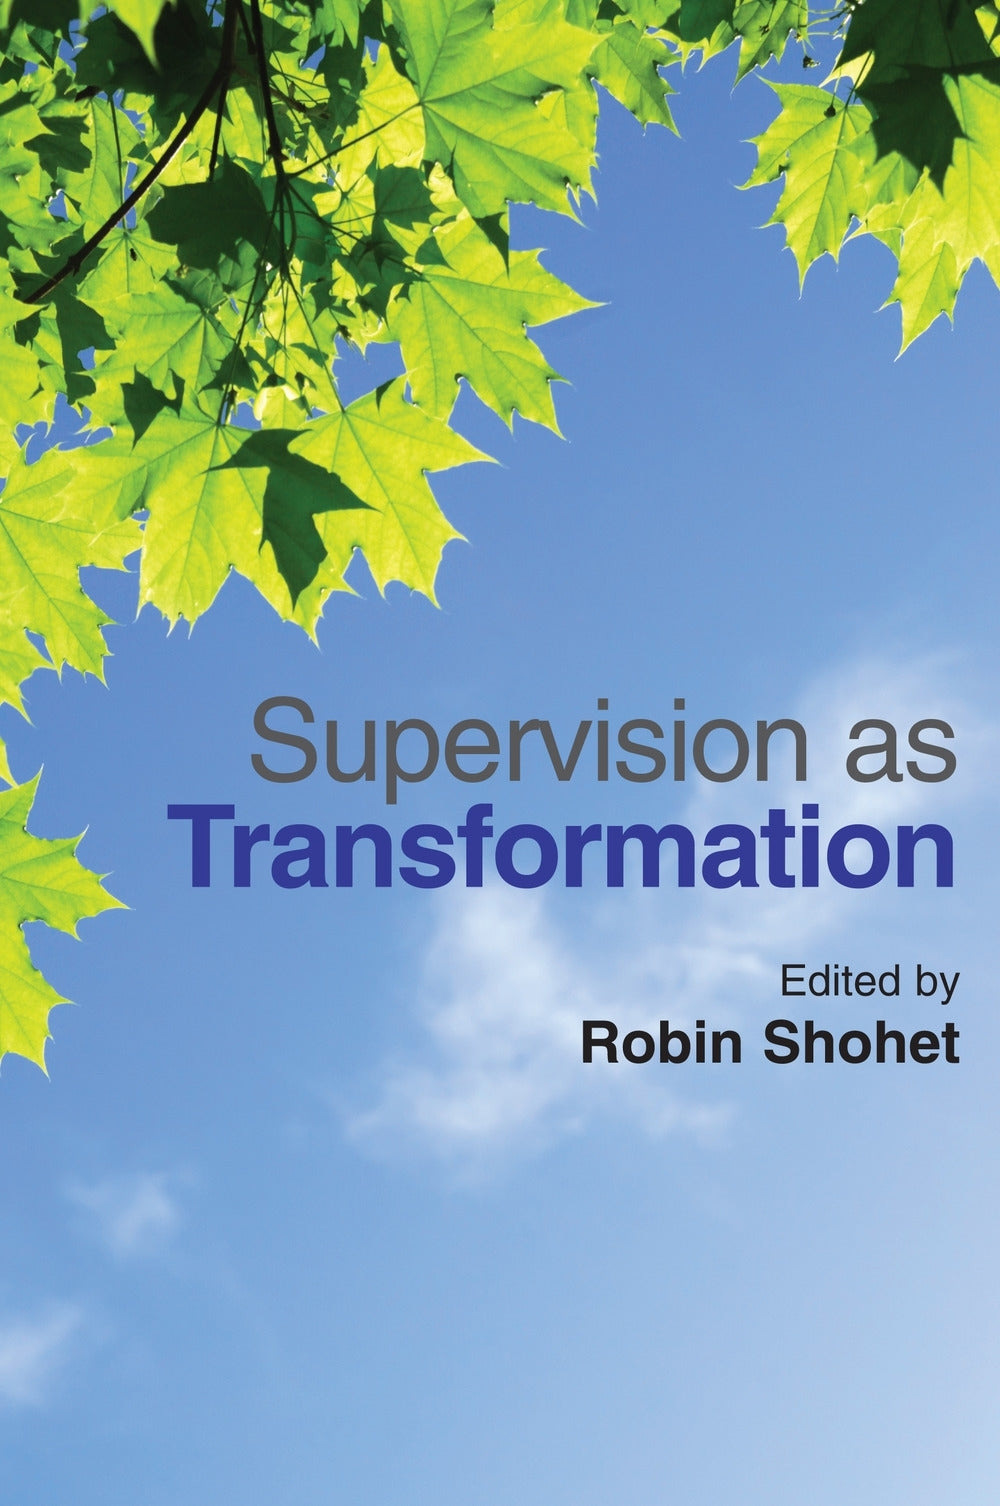 Supervision as Transformation by Robin Shohet, Ben Fuchs, No Author Listed